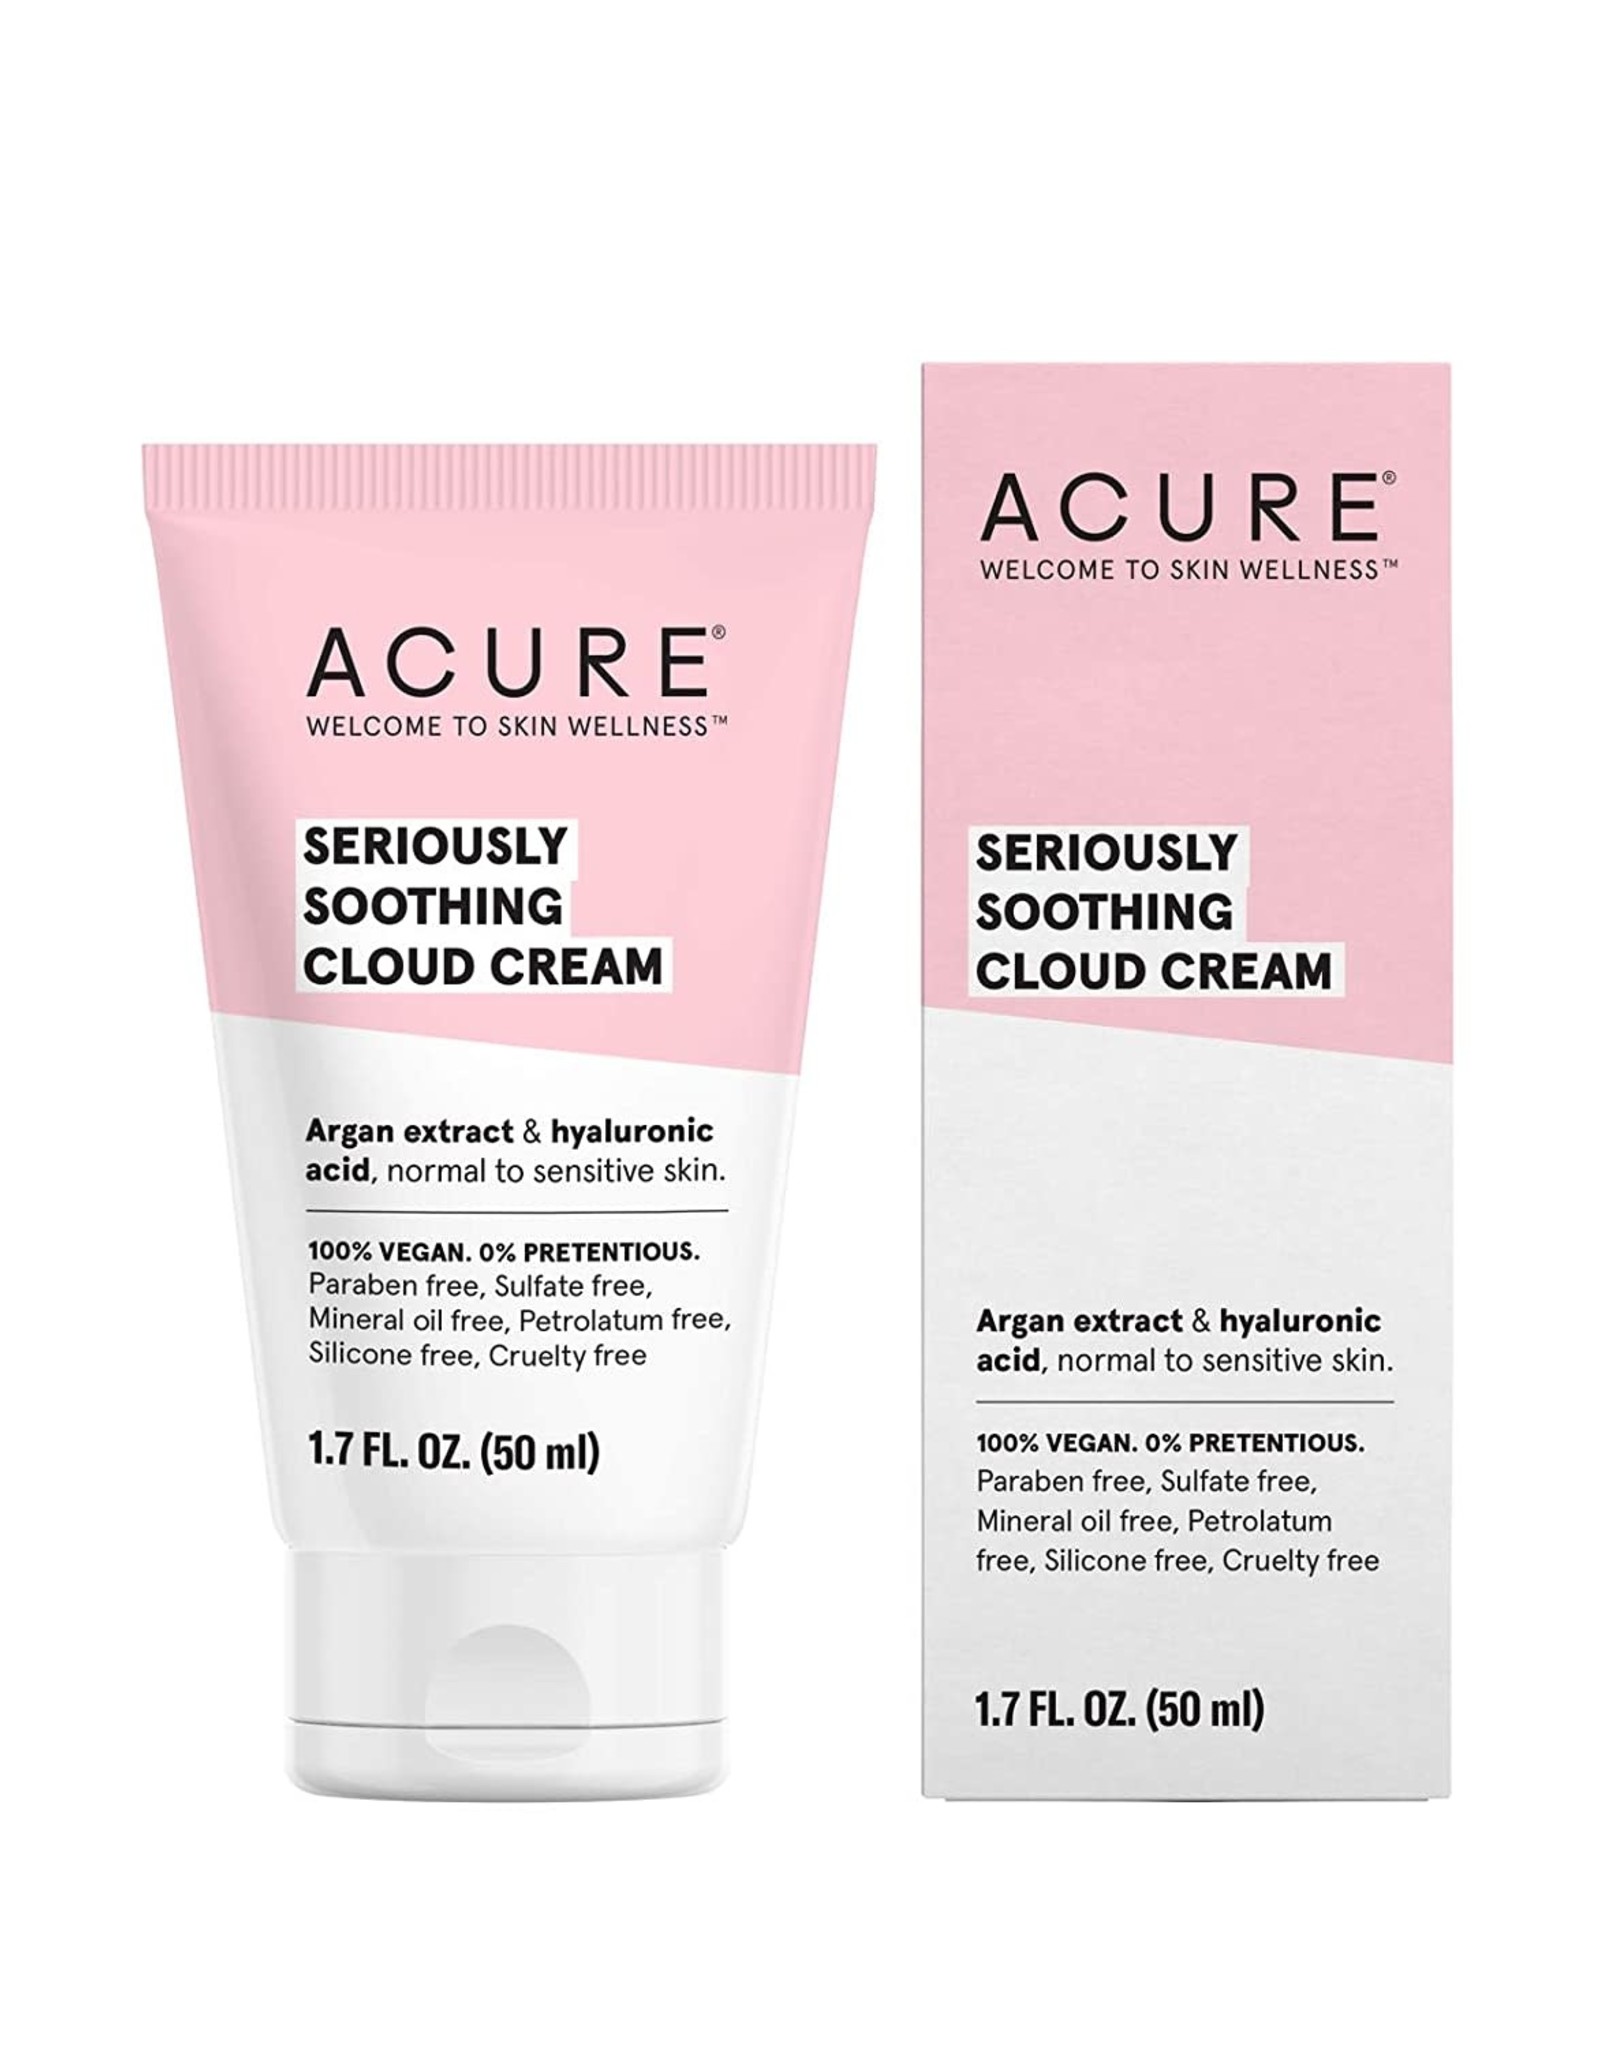 ACURE X Acure FACIAL CLD CREAM SOOTHING 1.7 FO